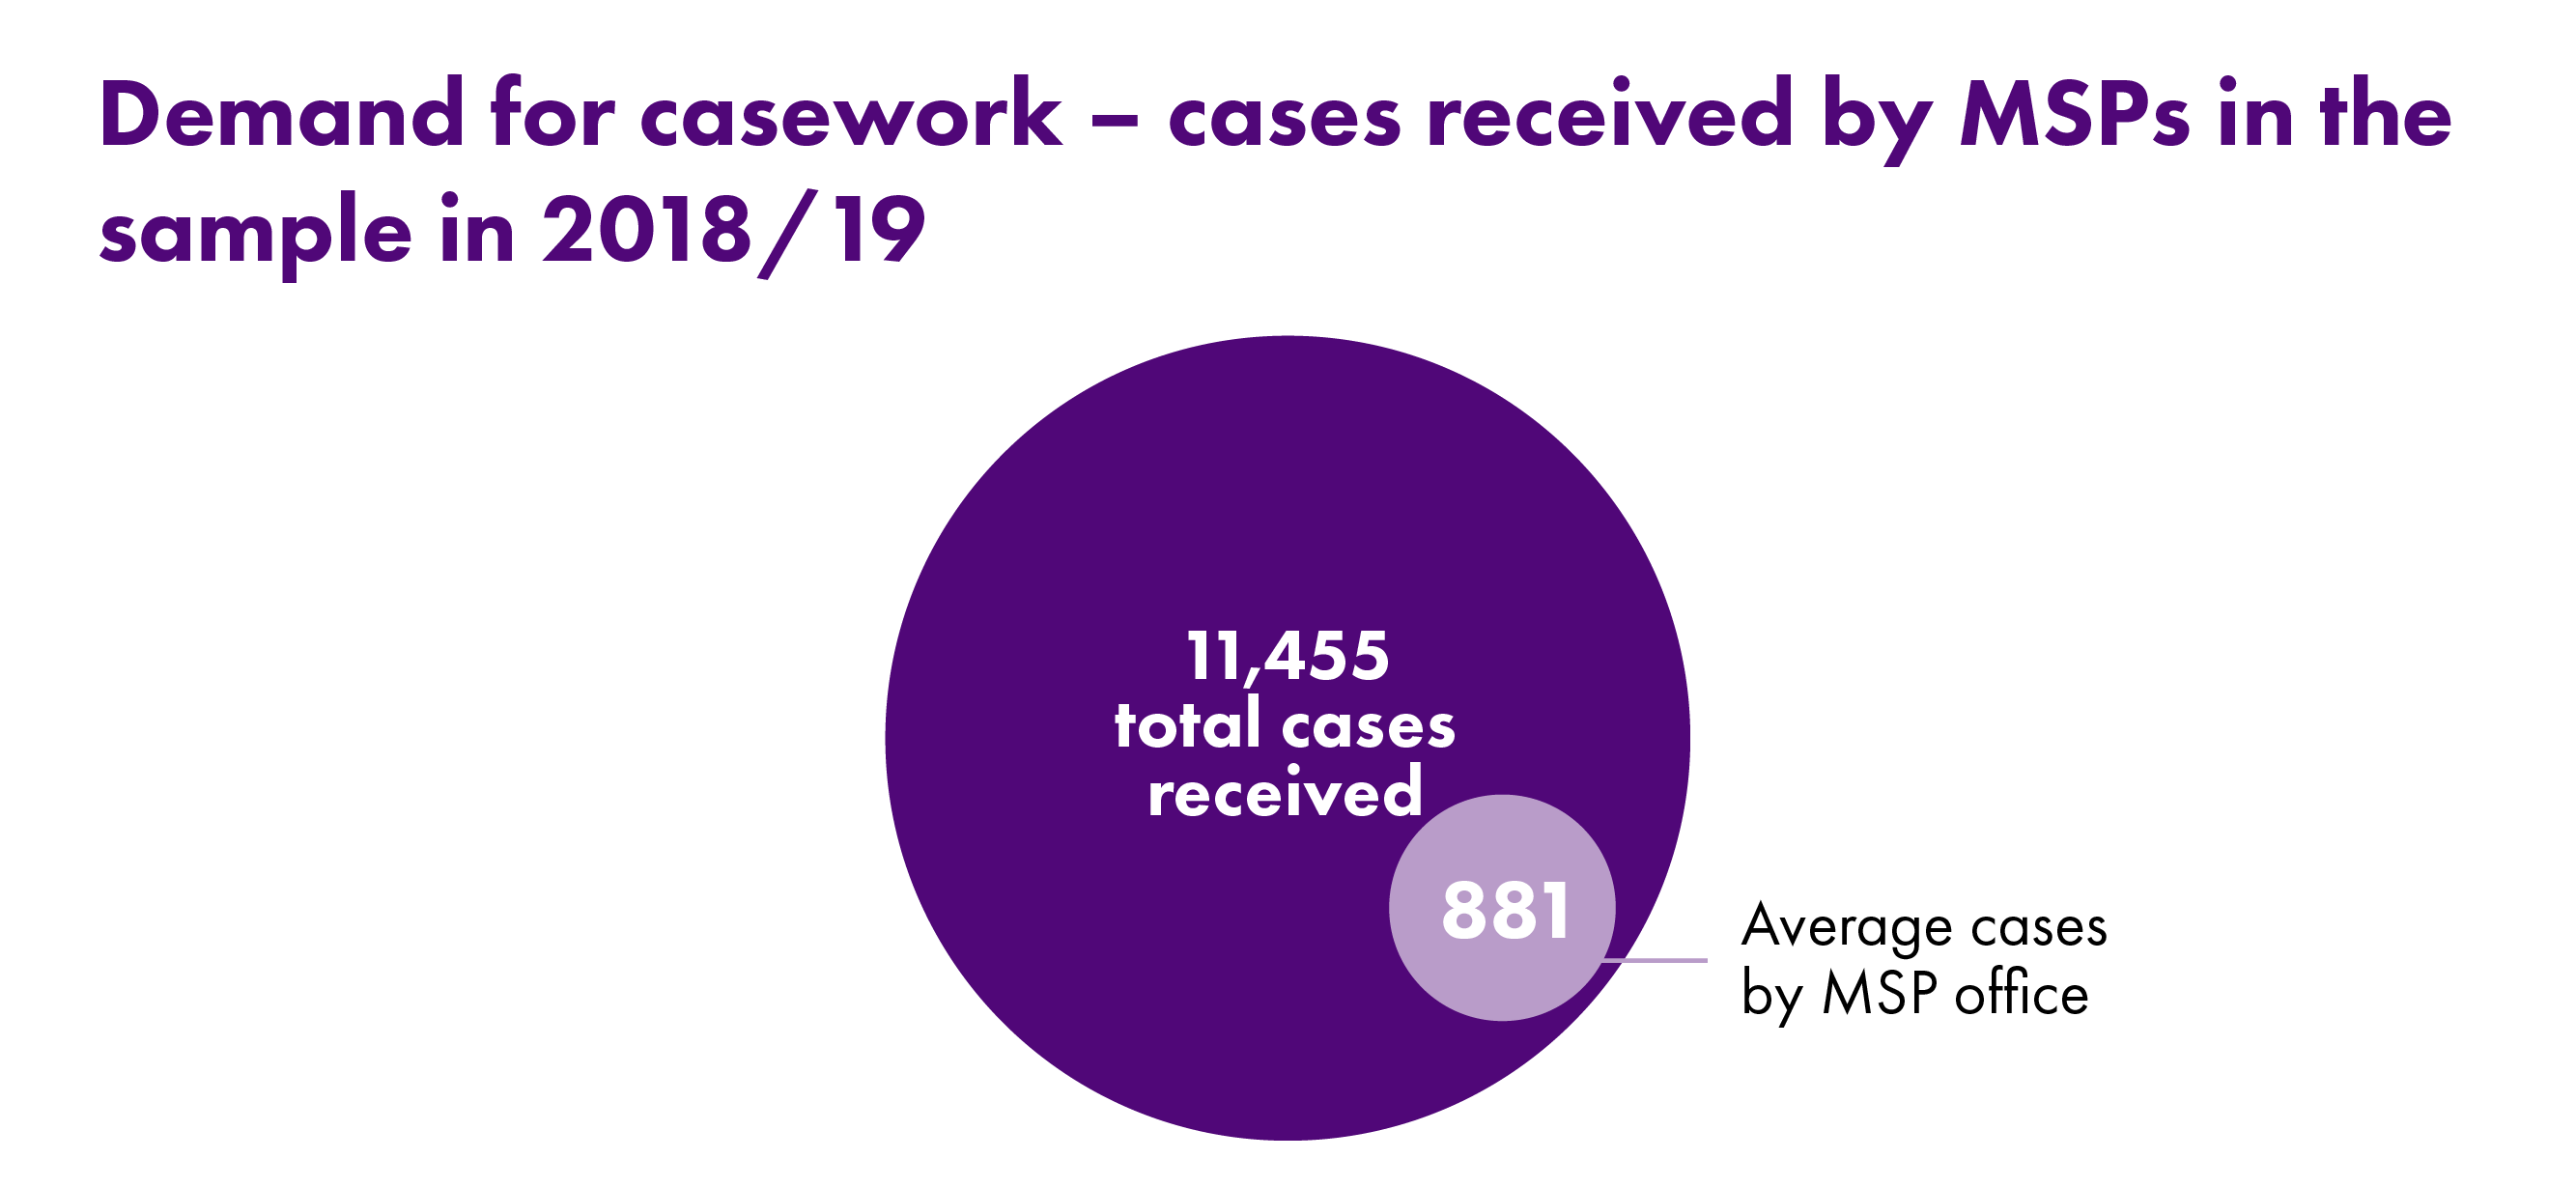 Infographic showing cases received by MSPs in the sample in 2018/19.  A total of 11,455 cases were received, with an average of 881 per office.